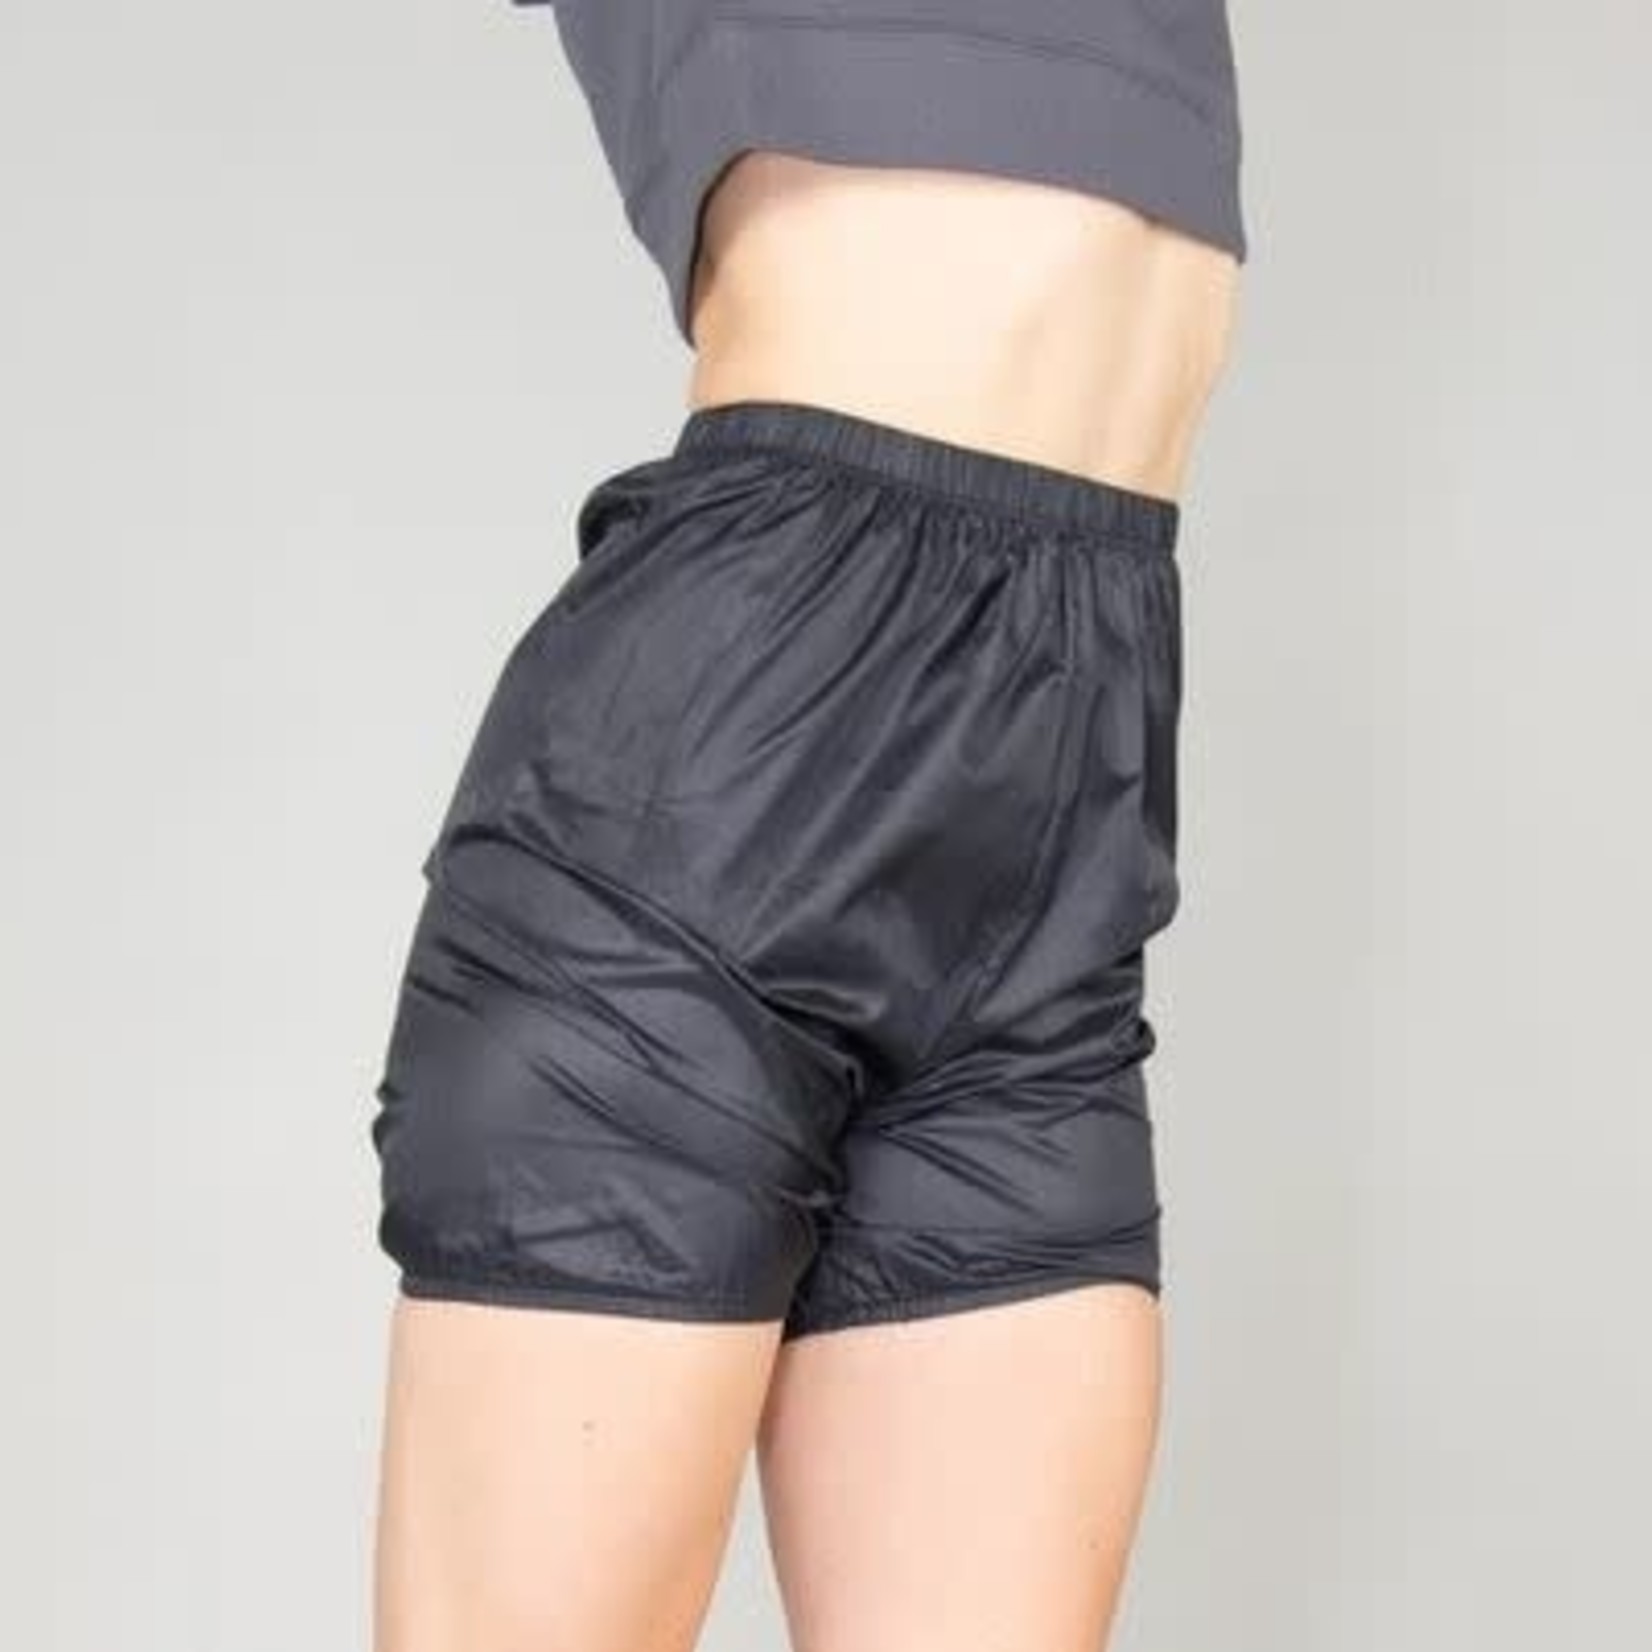 Body Wrappers Body Wrappers 746 Adult Warm-up Bloomers Shorts